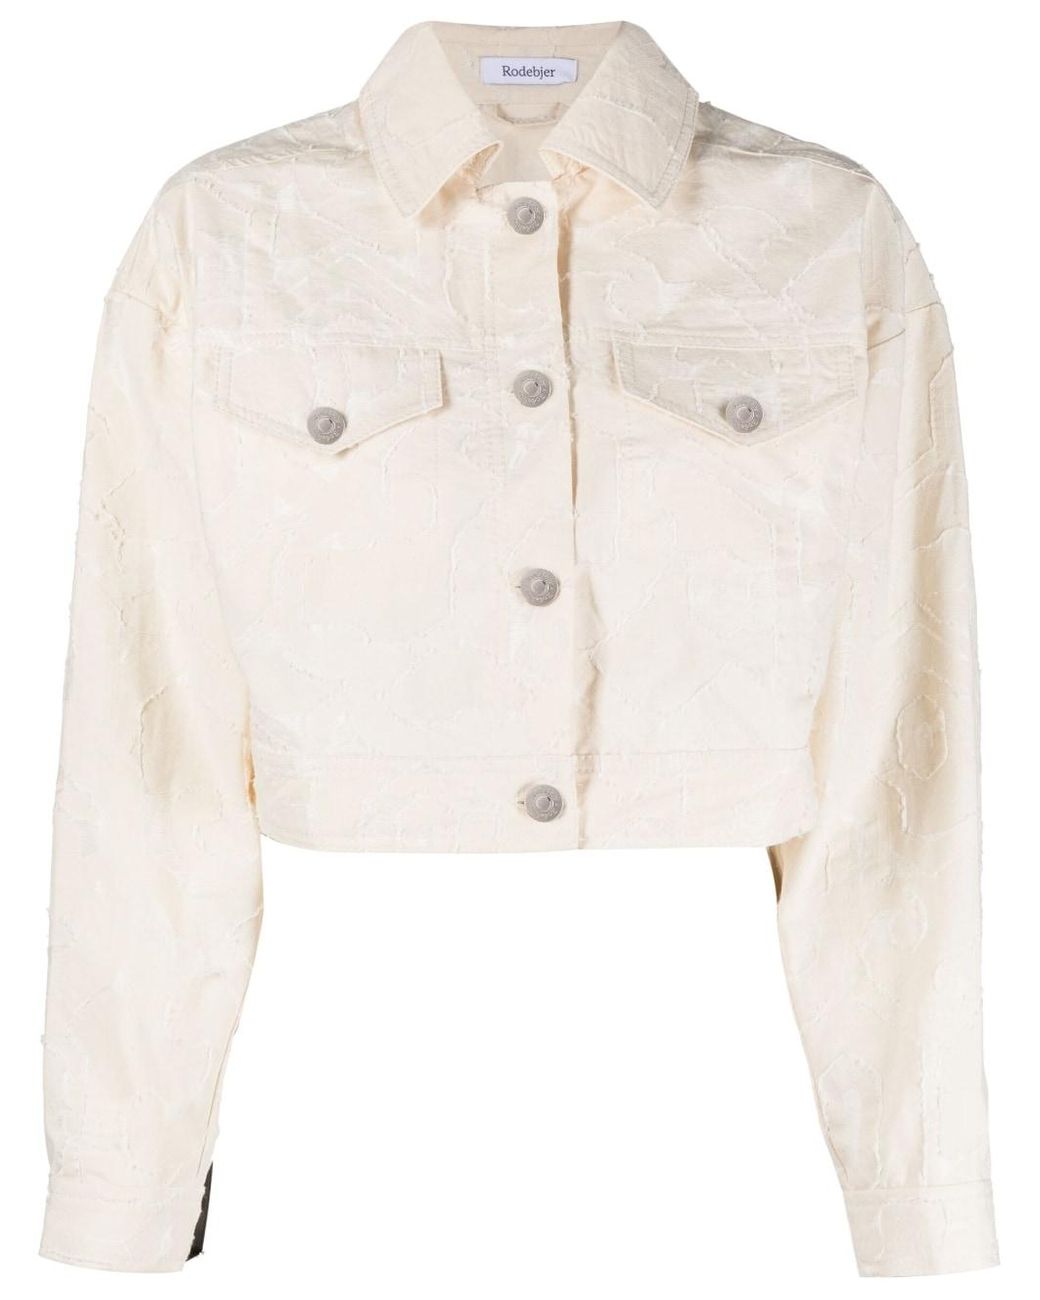 Rodebjer Cecina Cropped Cotton Jacket in Natural | Lyst